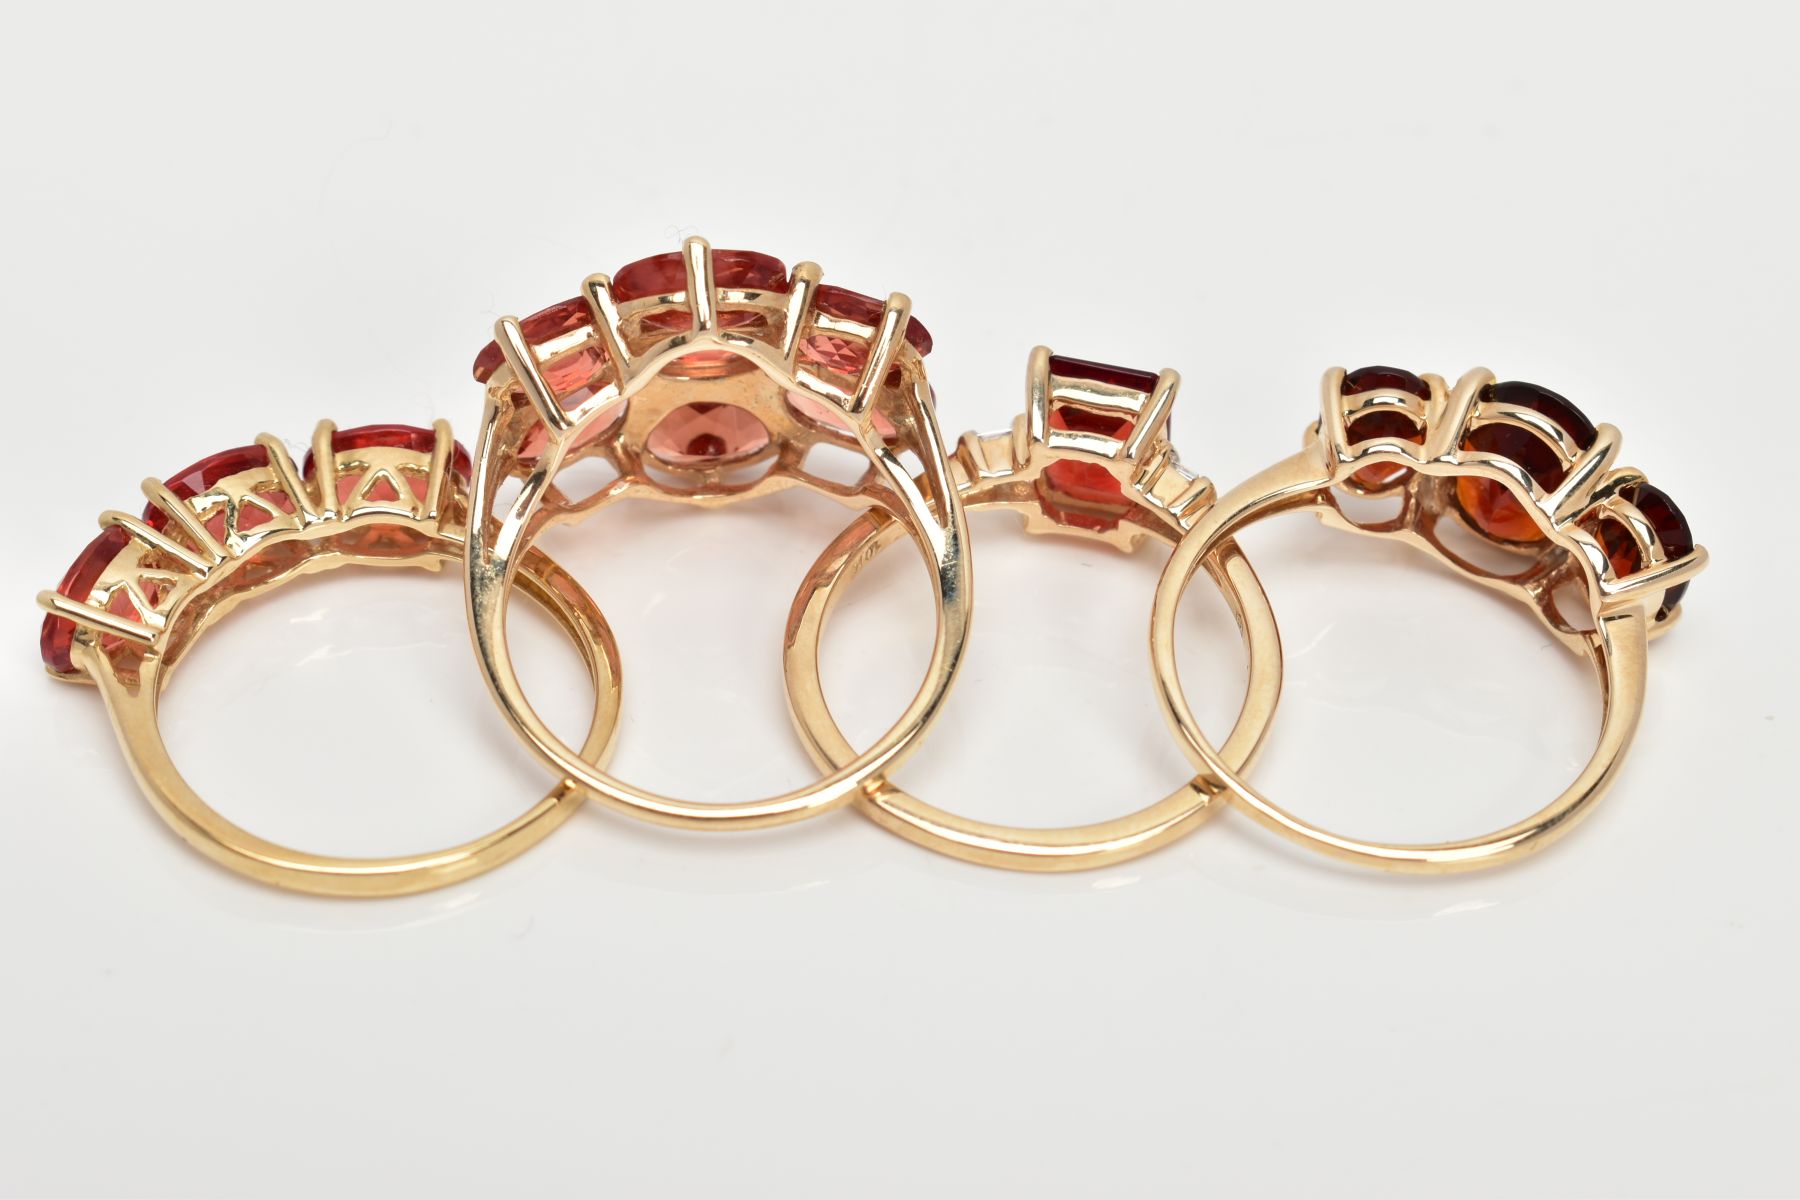 FOUR 9CT GOLD GEM SET RINGS, set with orange and red gemstones possibly Andesine, each with a 9ct - Image 3 of 3